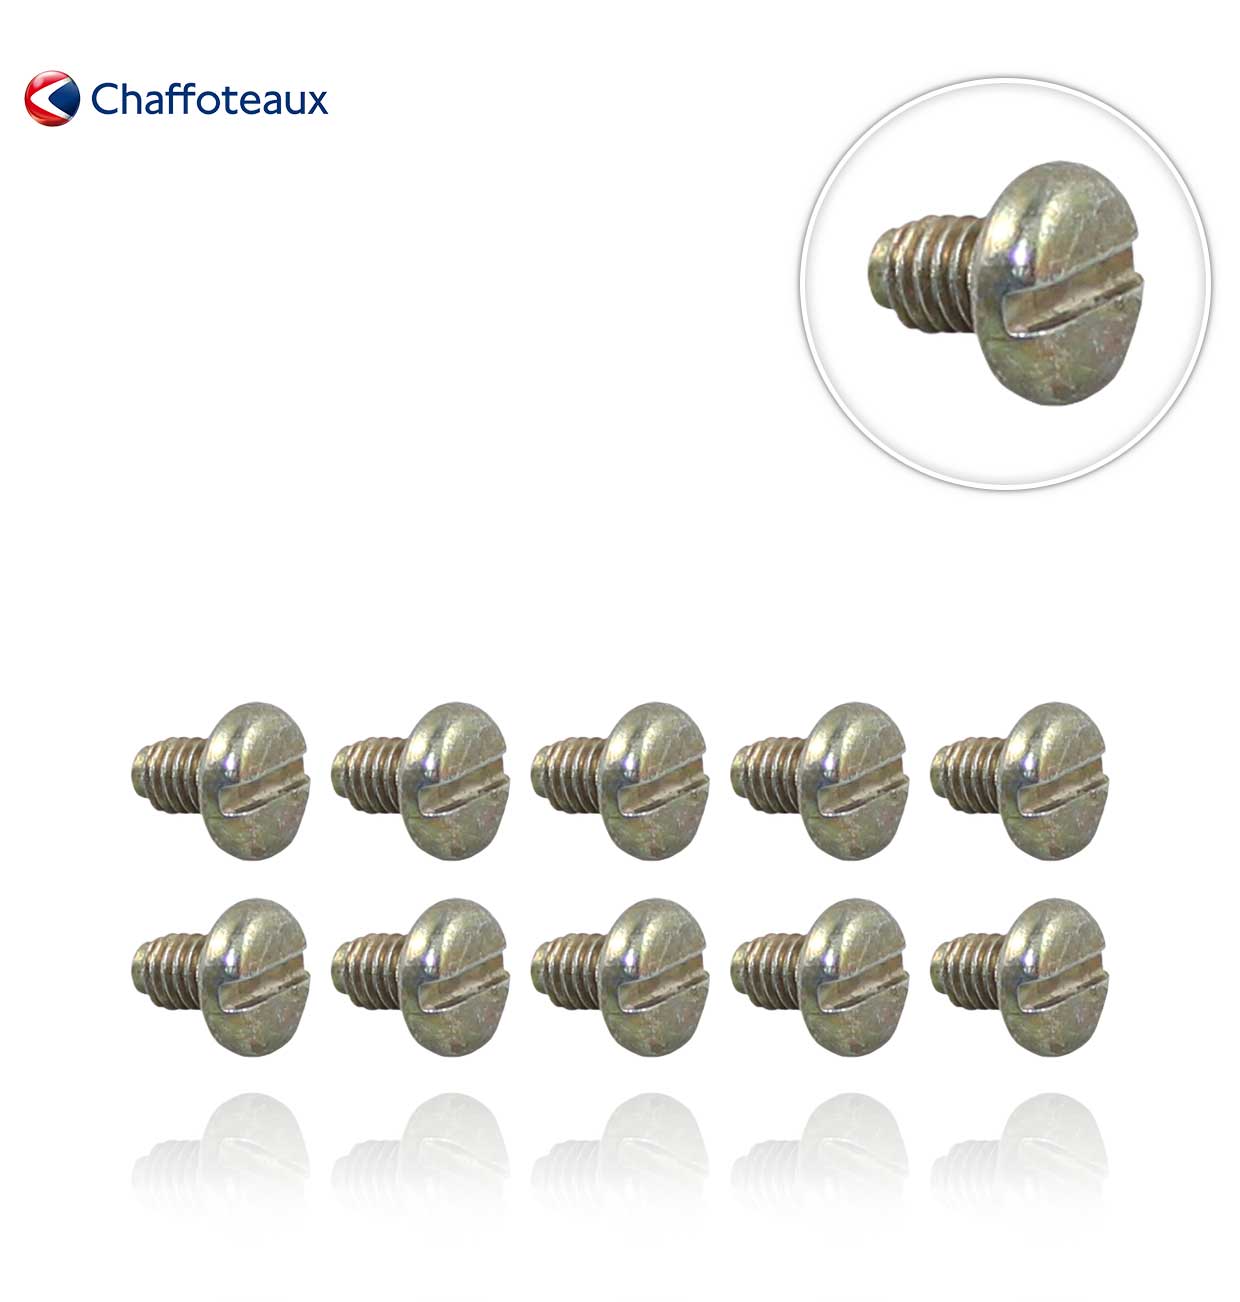 TORNILLOs M 4-6 (10uds.) CHAFFOTEAUX  60019197-03